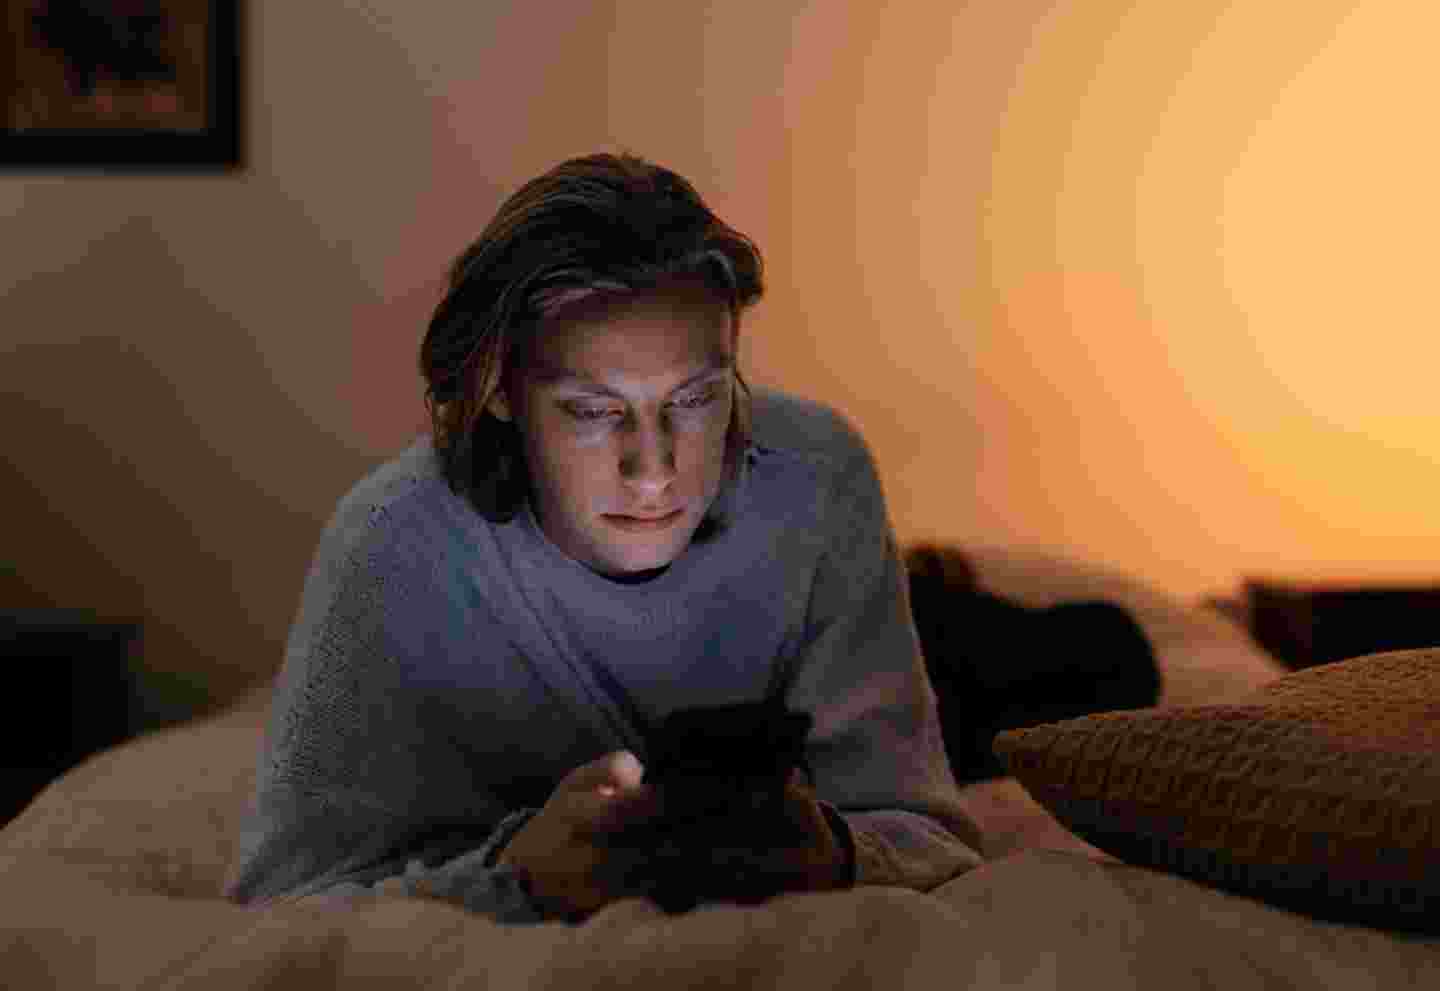 A young person using a smartphone in bed in dim lighting.